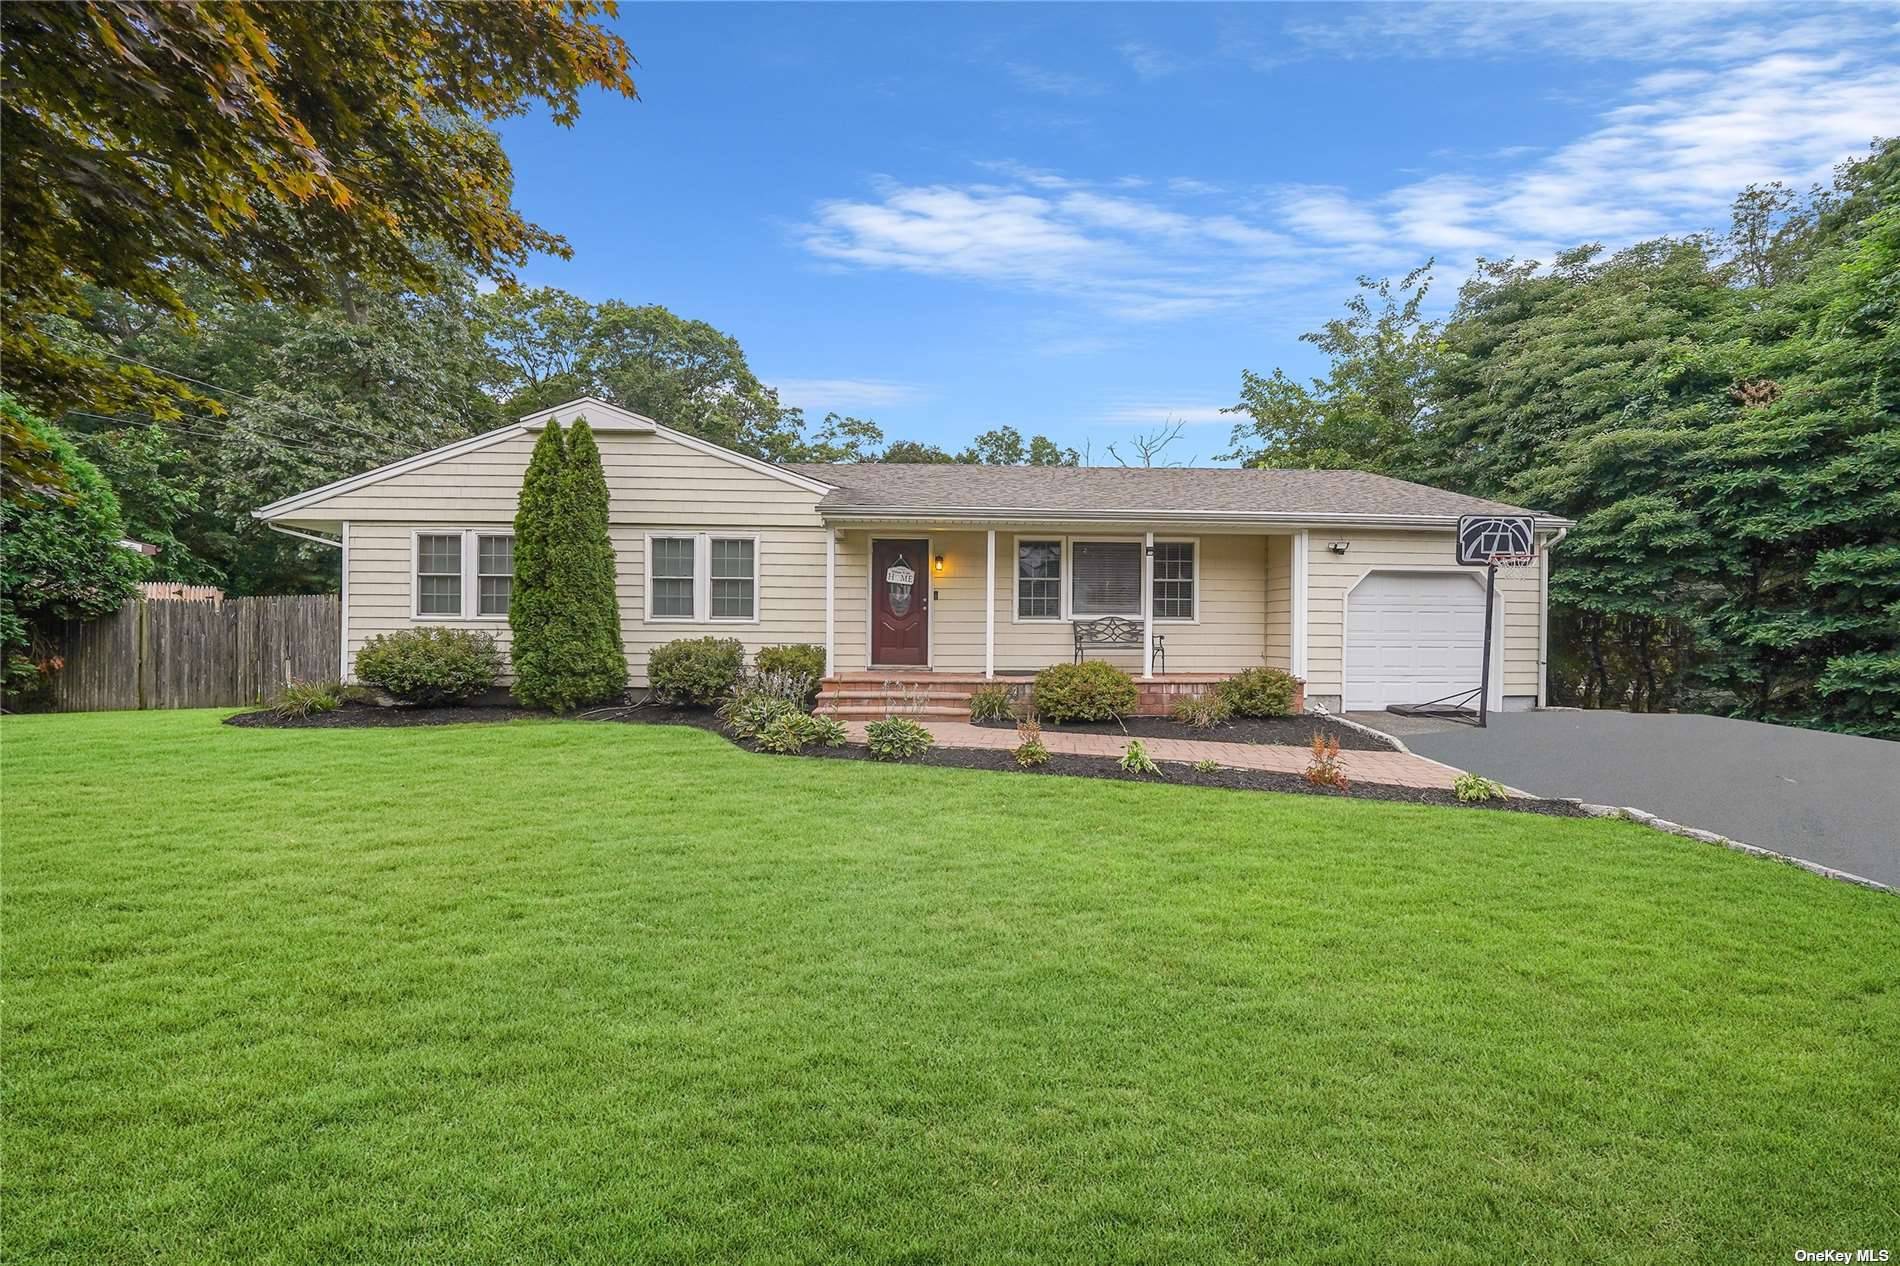 Beautiful recently renovated ranch in Connetquot School district featuring 4 bedrooms, 2 bathrooms on first floor and 2 bedrooms 1 bathroom in a fully finished basement with a separate entrance.